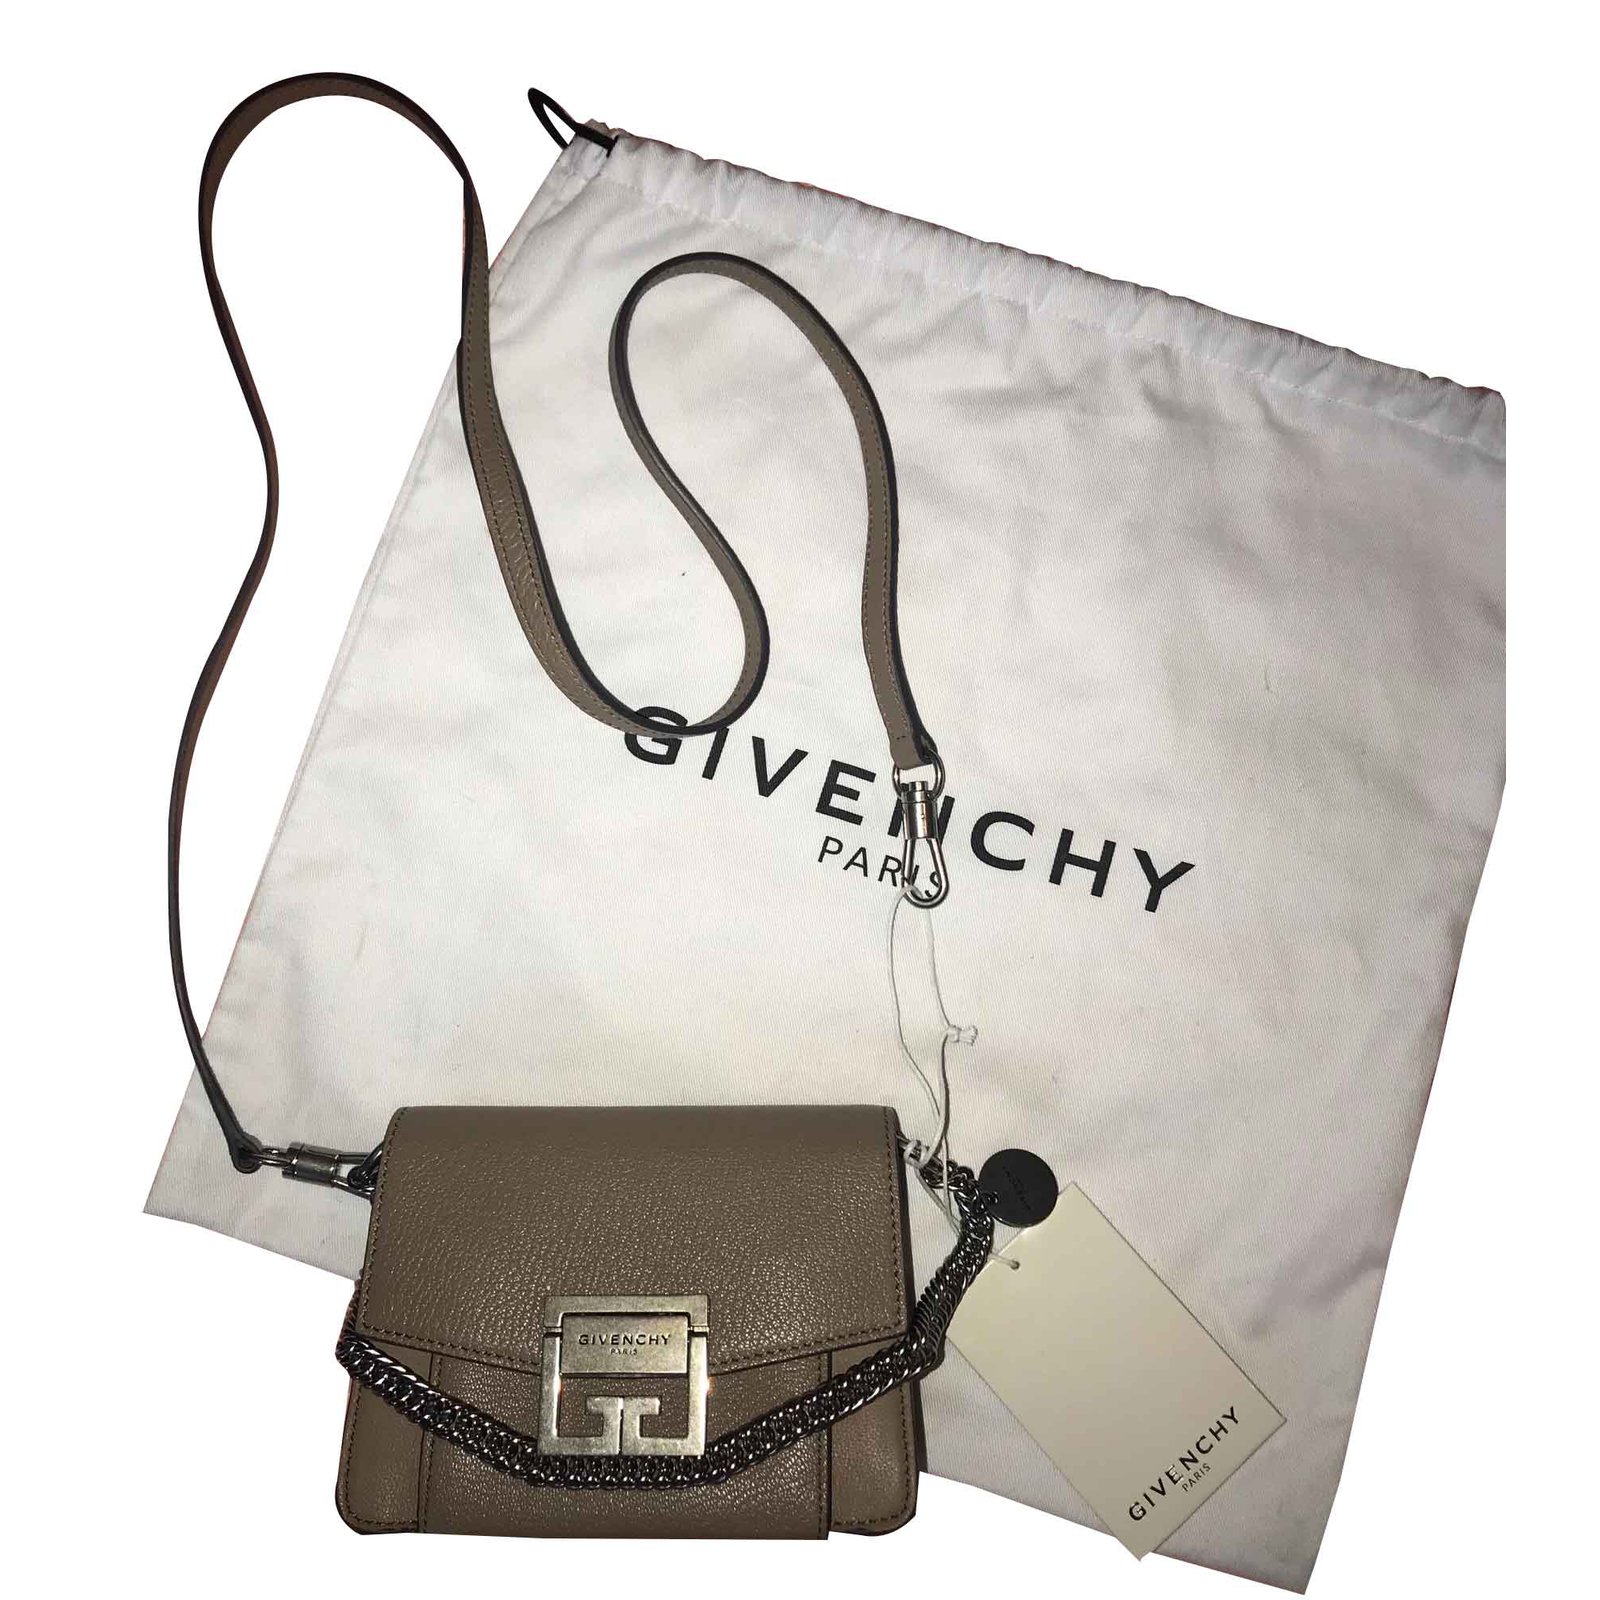 givenchy gv3 beige